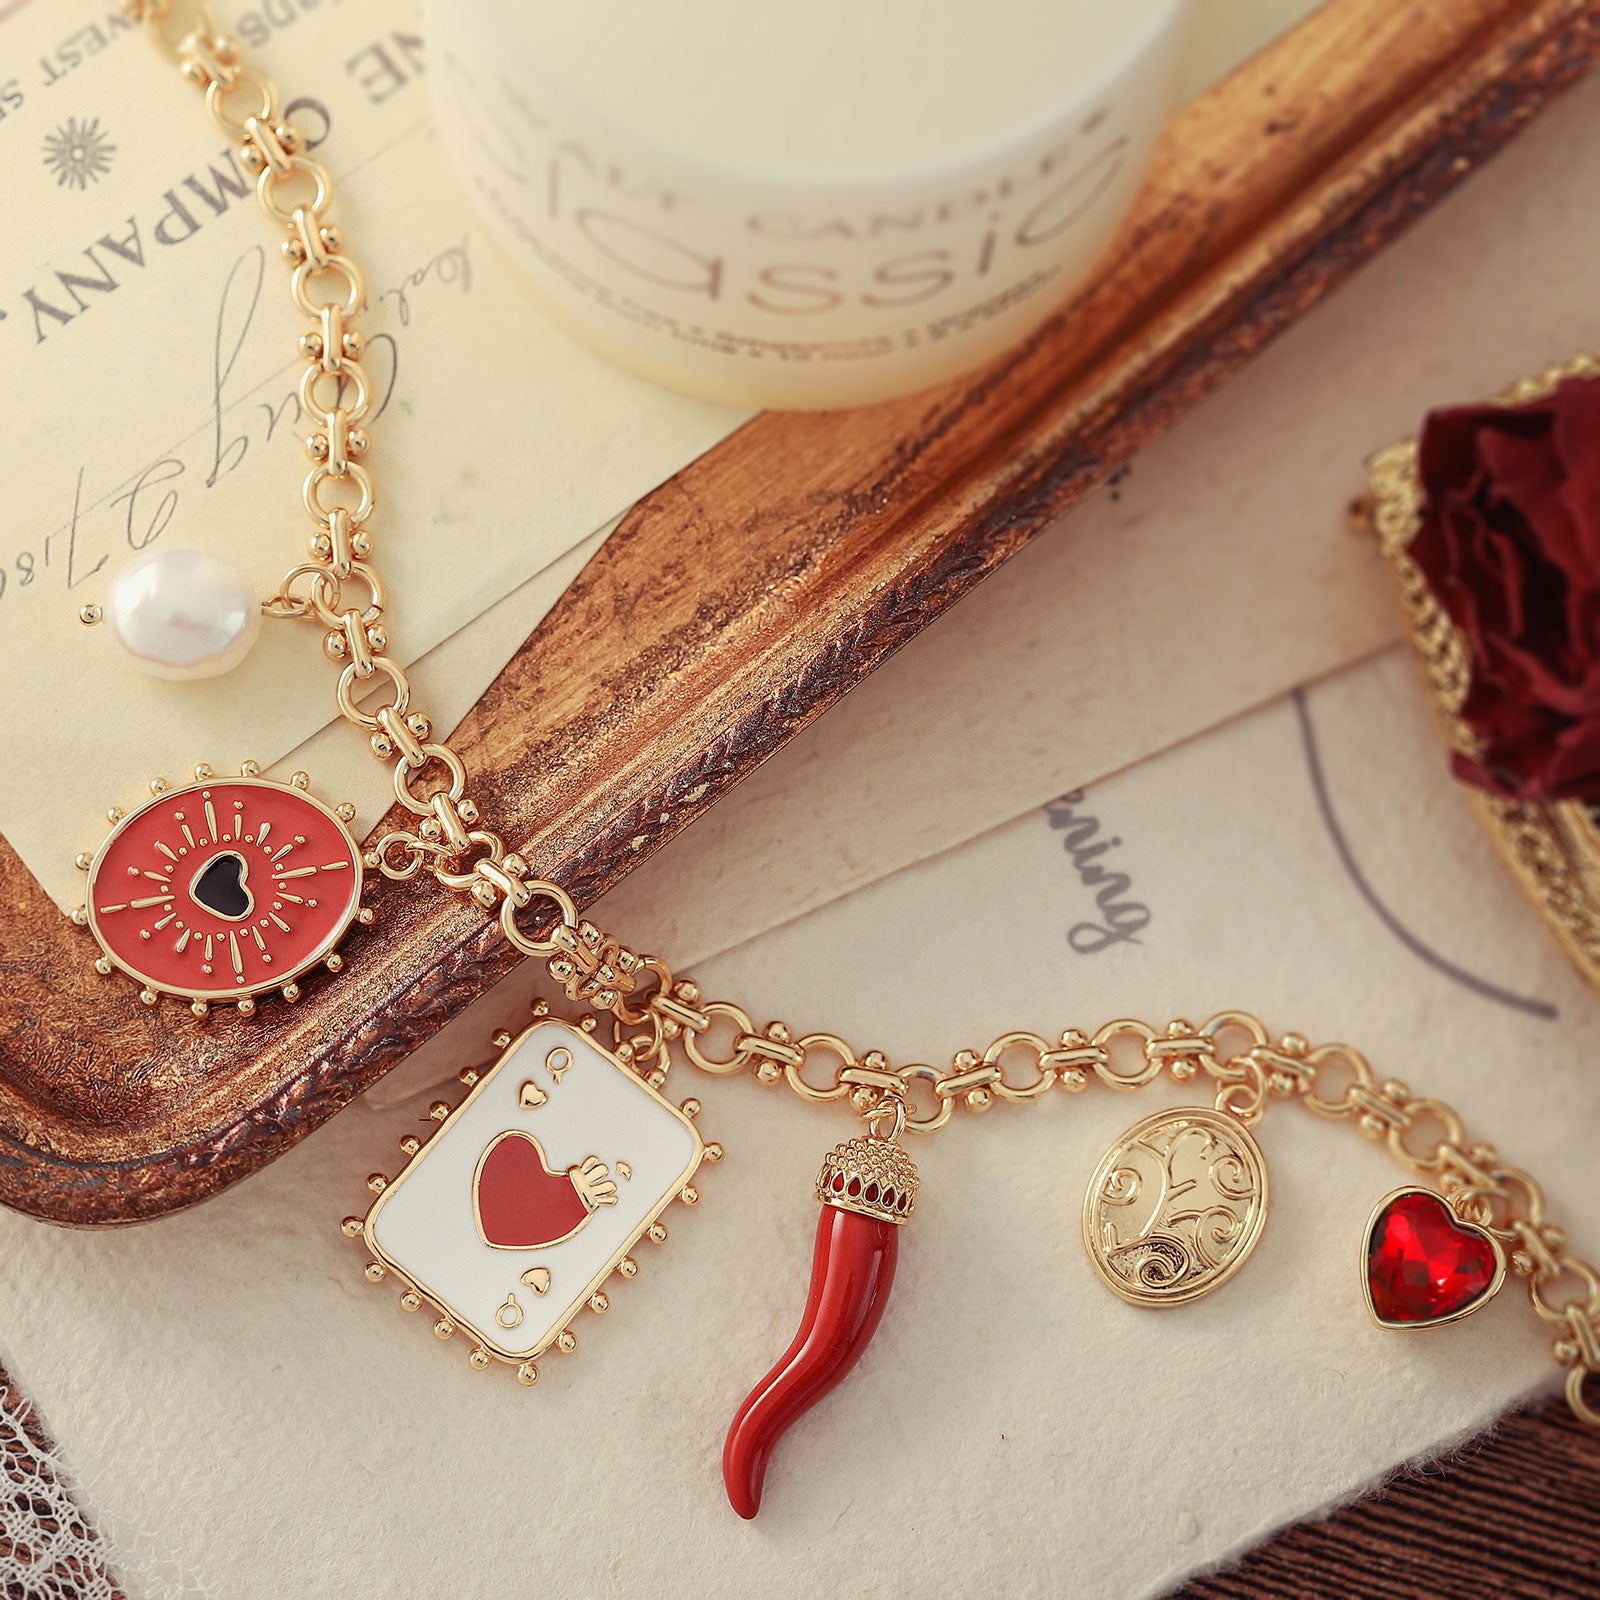 Charm necklace | Charm Necklaces For Women | Charm Necklace Online Store | Selenichast